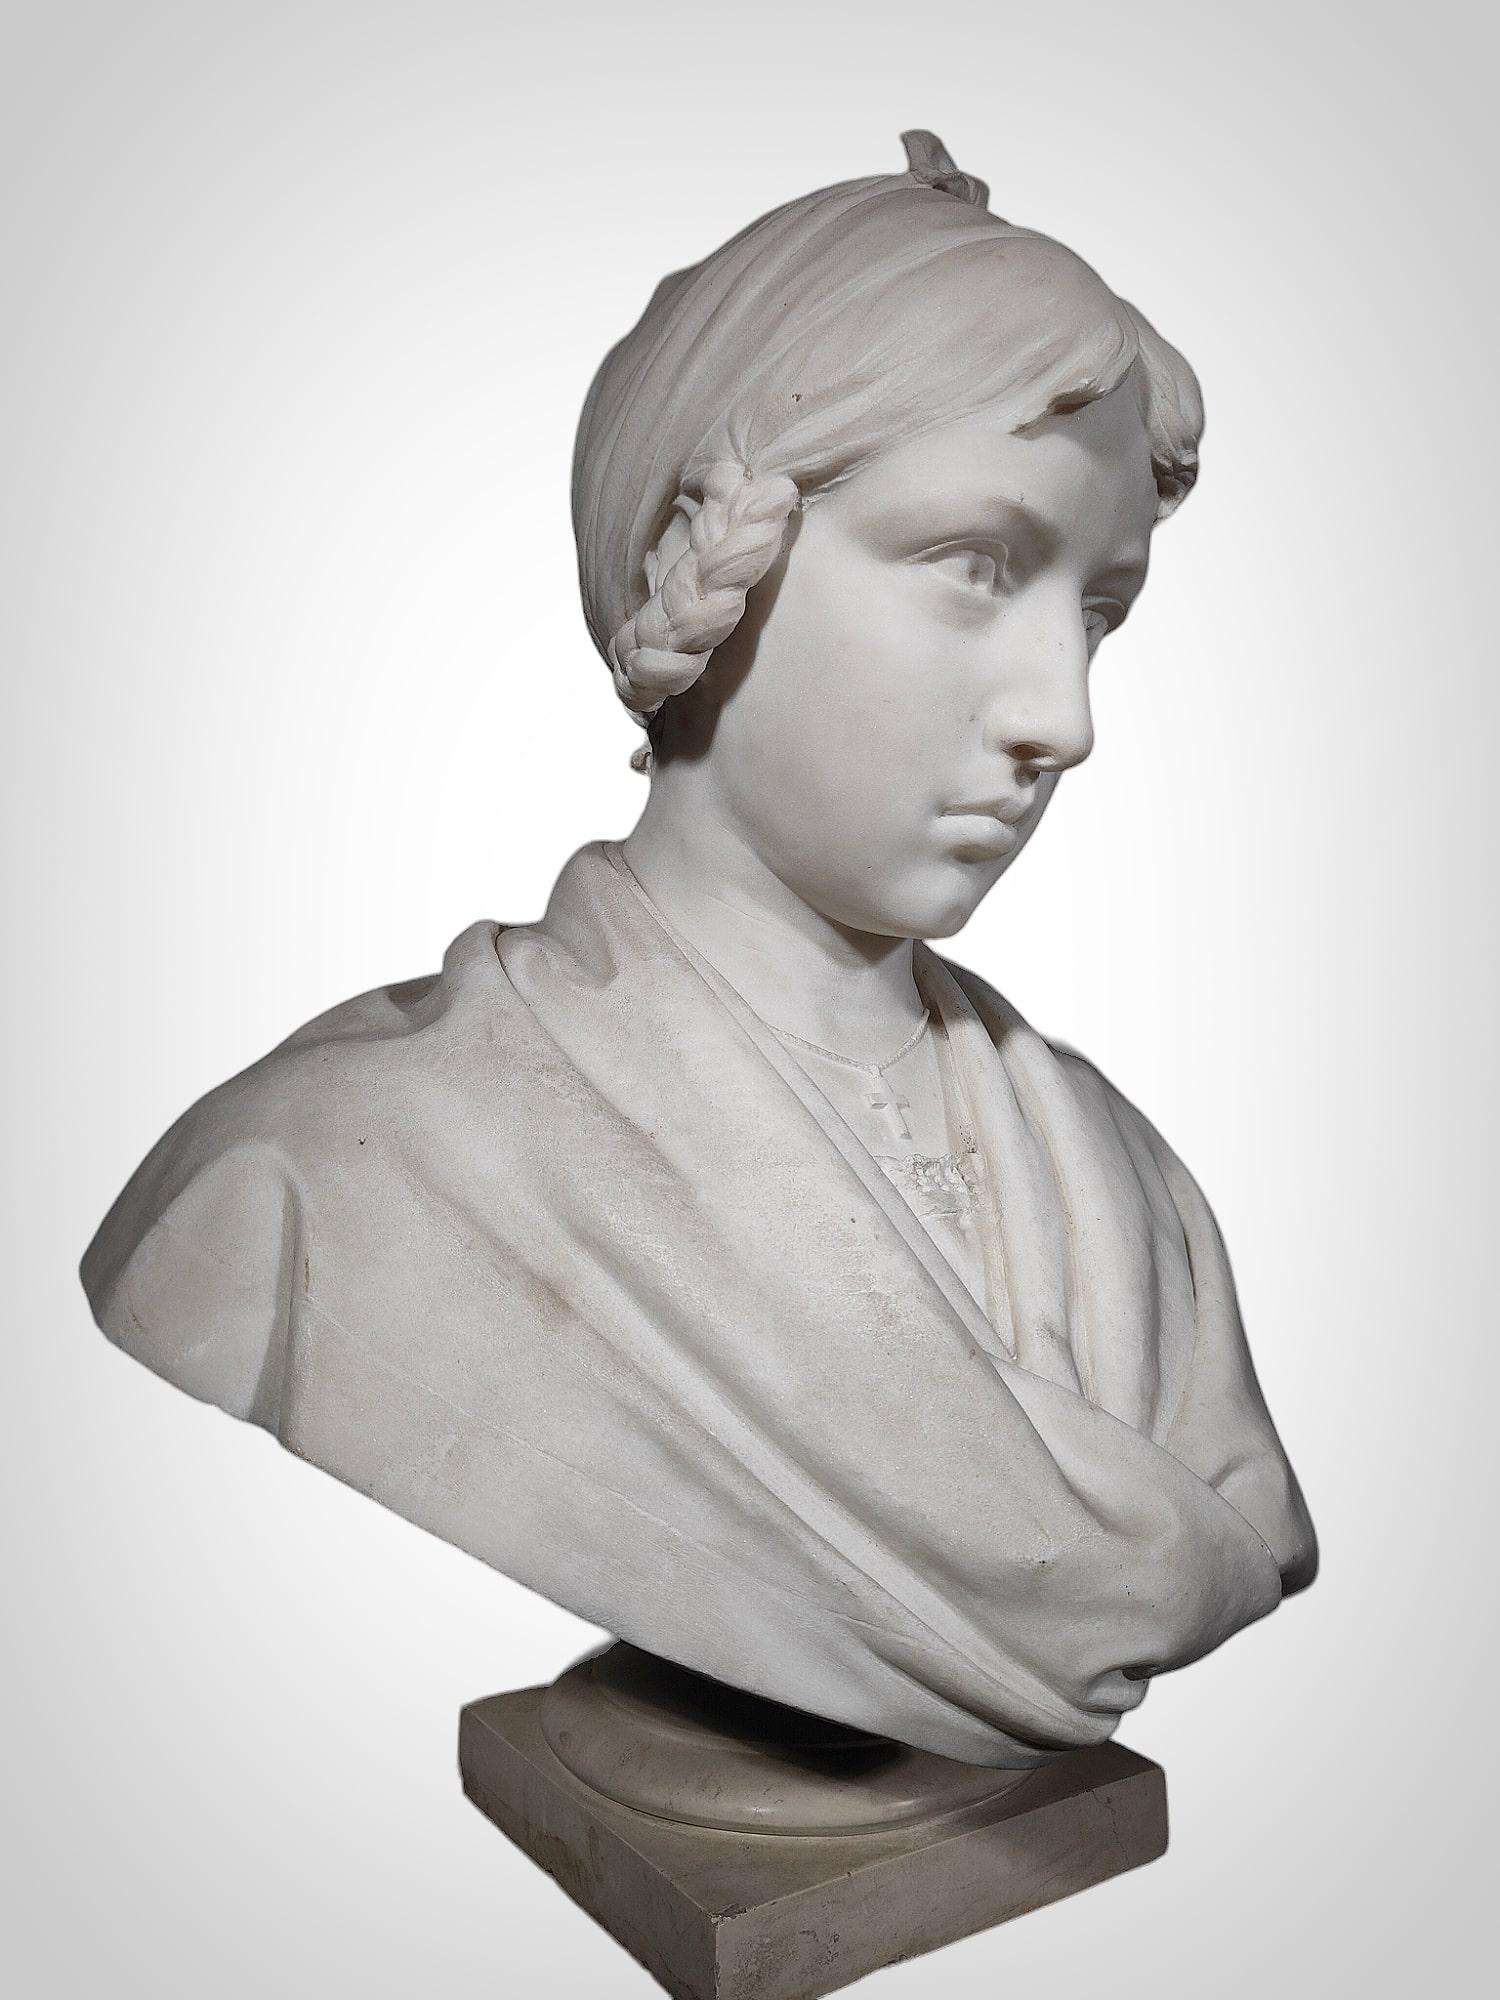 Product Description:

Material: White Carrara Marble
Size: Life-size
Representation: Young Girl
Signature: Illegible, dated 1927
Dimensions: 56 x 48 x 30 cm (height x width x depth)
Features and Details:
This elegant marble bust in white Carrara